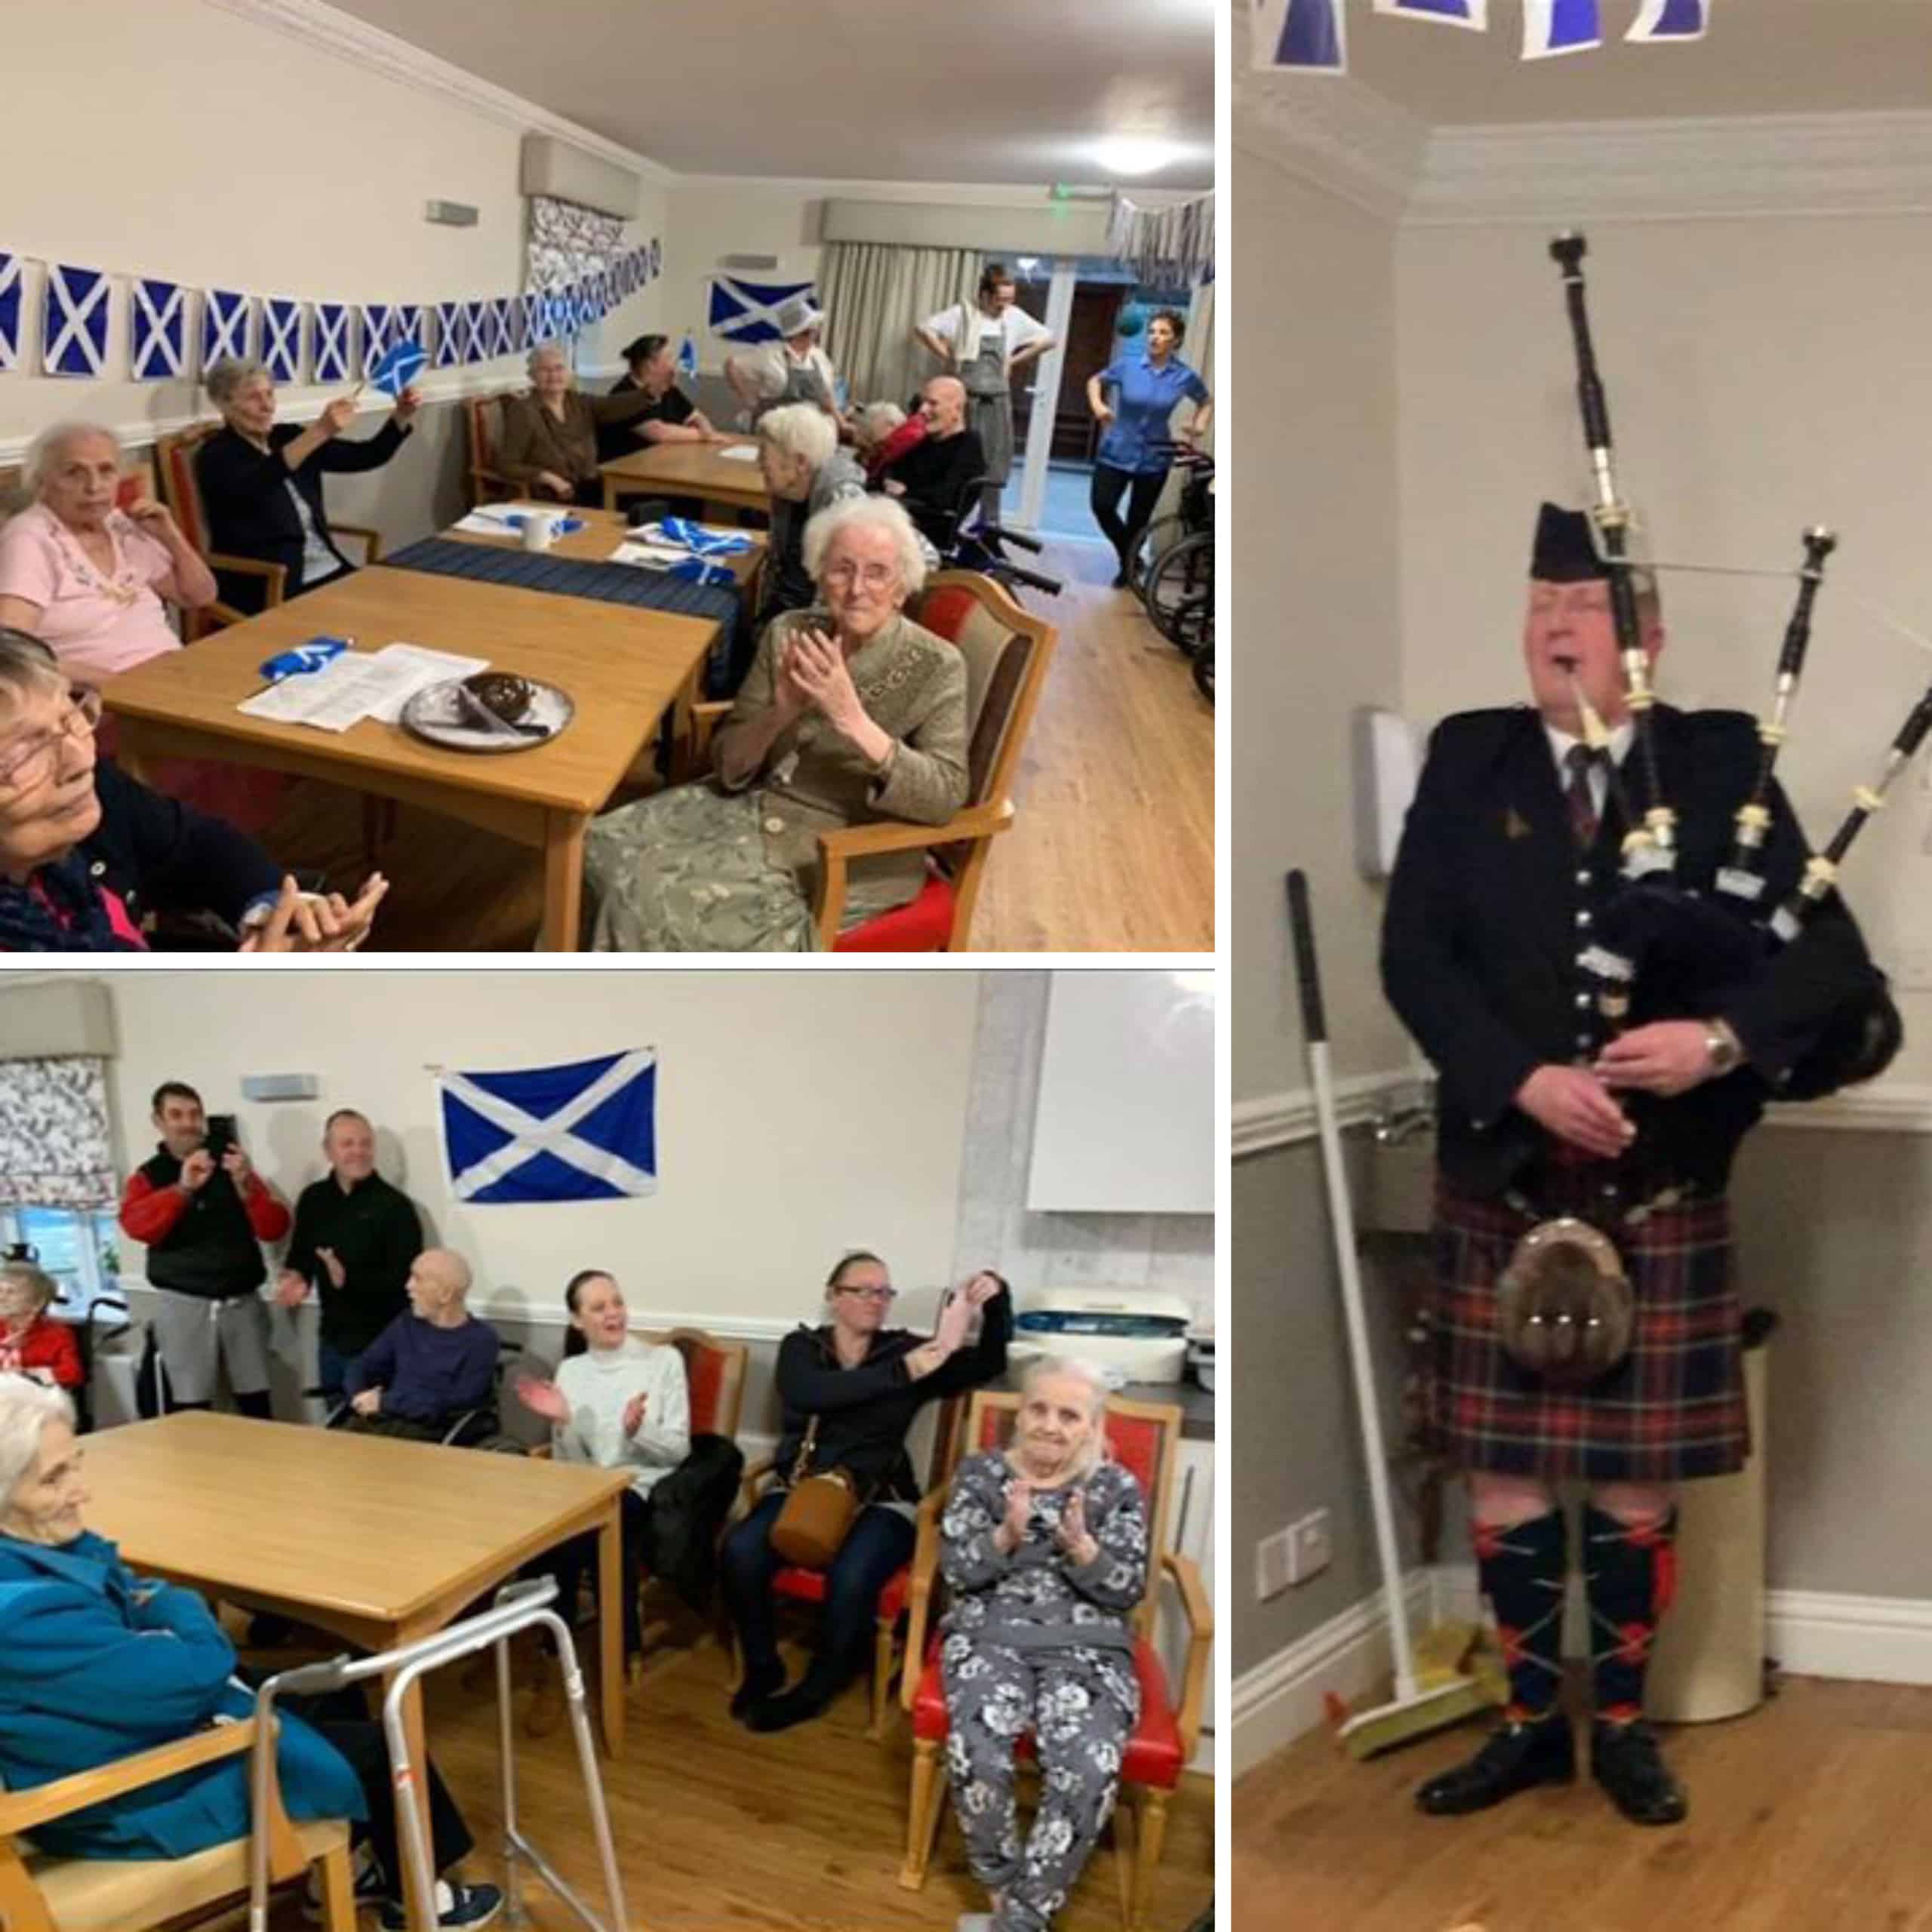 Residents of Willow Brook House in Corby celebrate Burns Night with haggis and a Scottish piper.